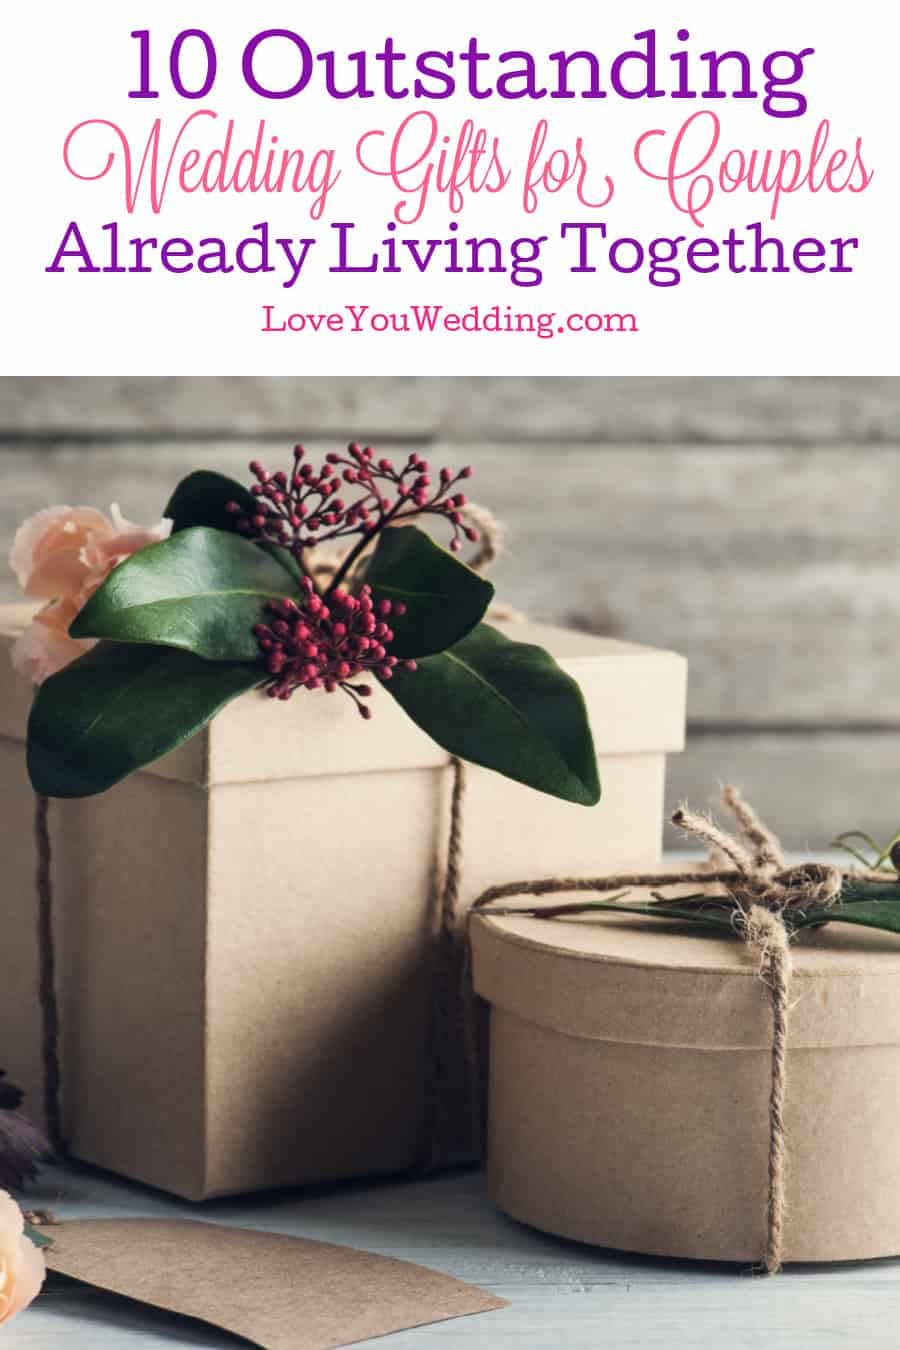 Wedding Gift Ideas For Couples Living Together
 10 Outstanding Wedding Gift Ideas for Couples Already